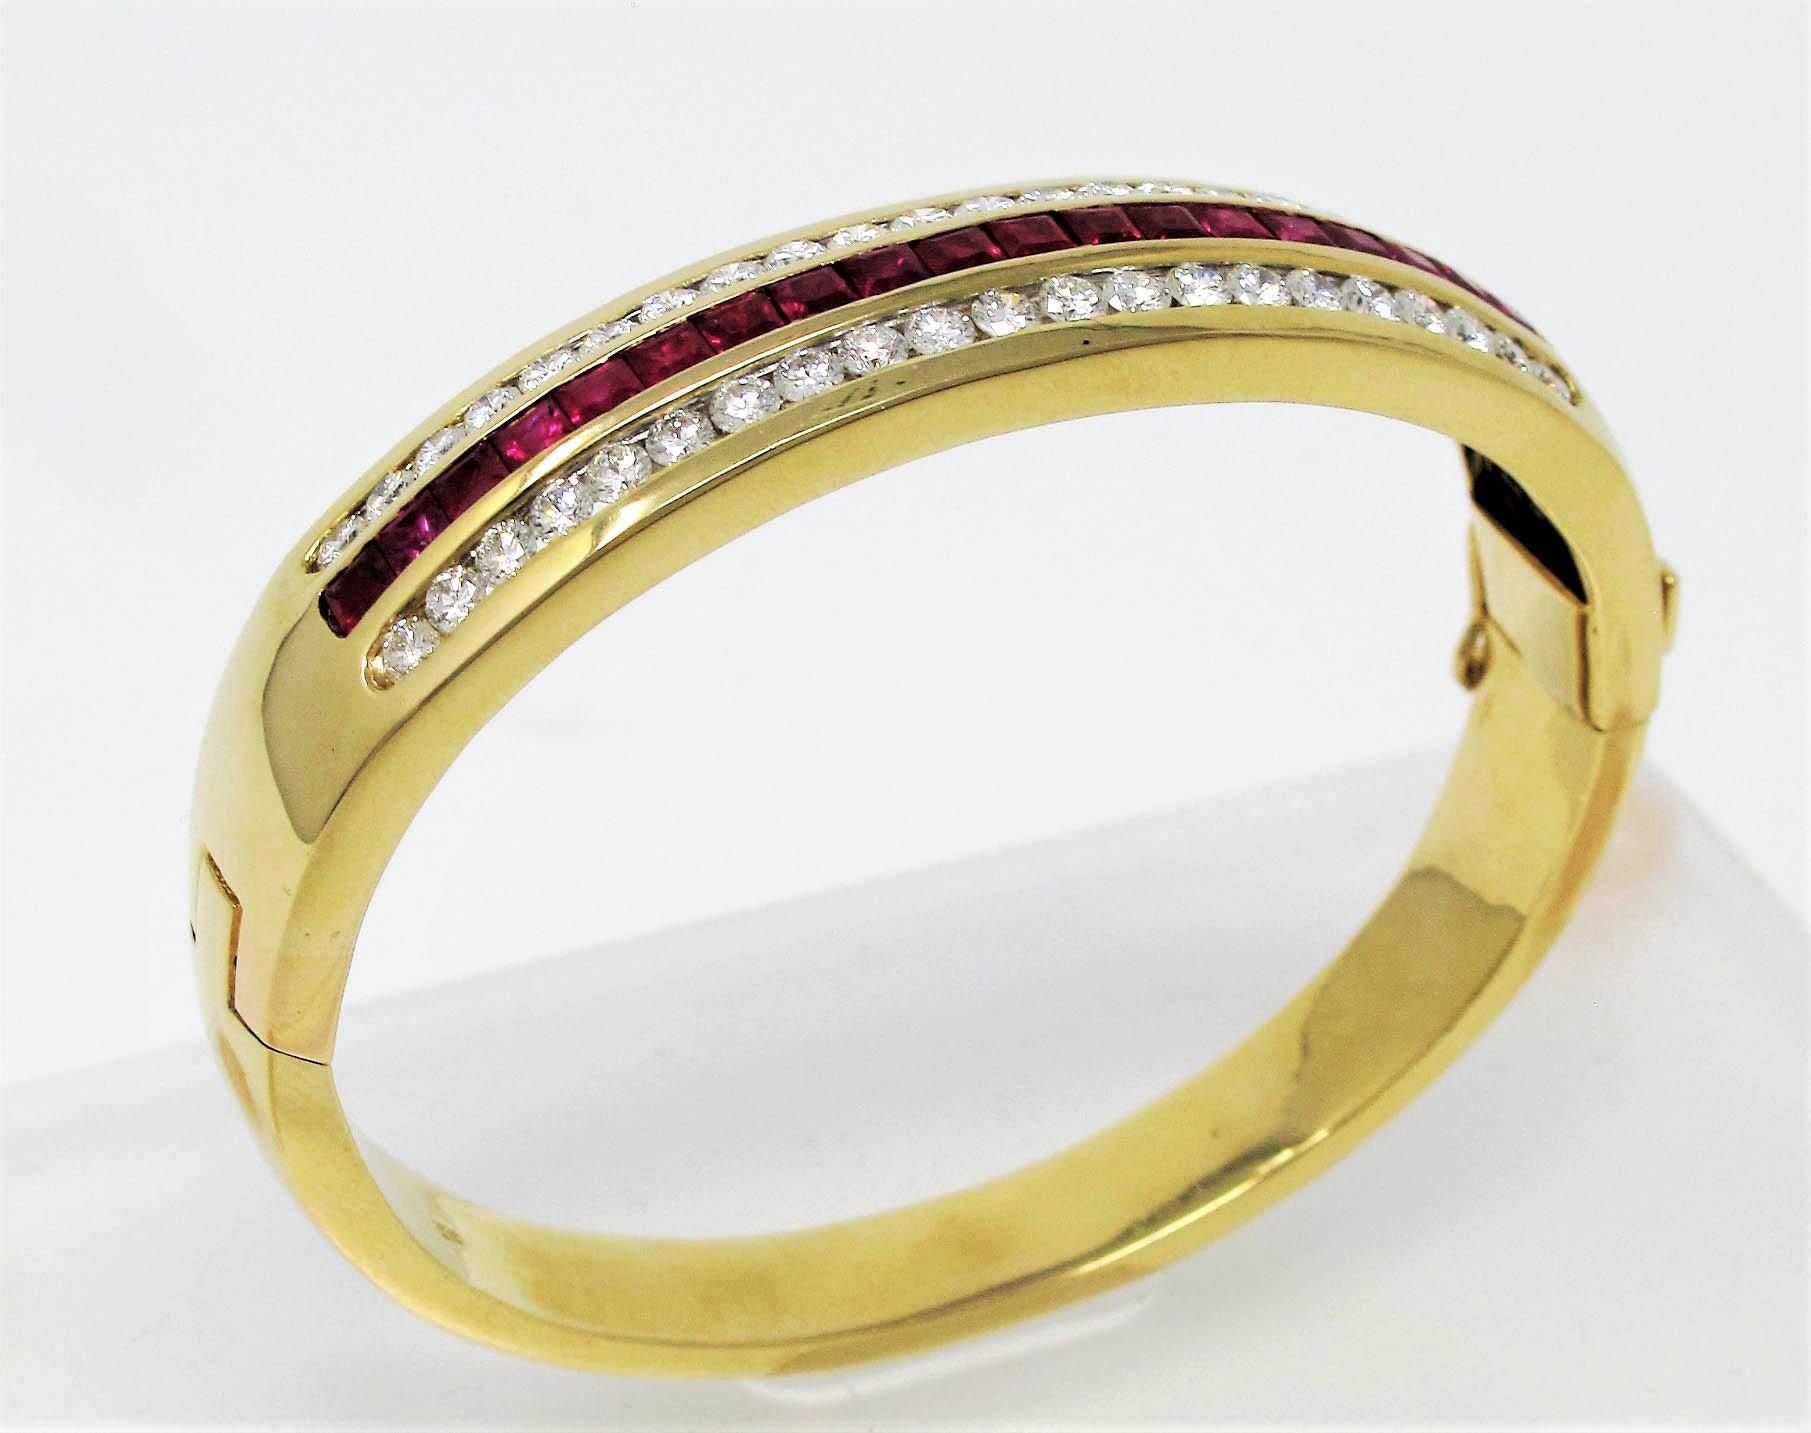 Multi Row Channel Set 6.75 Carats Diamond and Ruby 14 Karat Gold Bangle Bracelet In Good Condition For Sale In Scottsdale, AZ